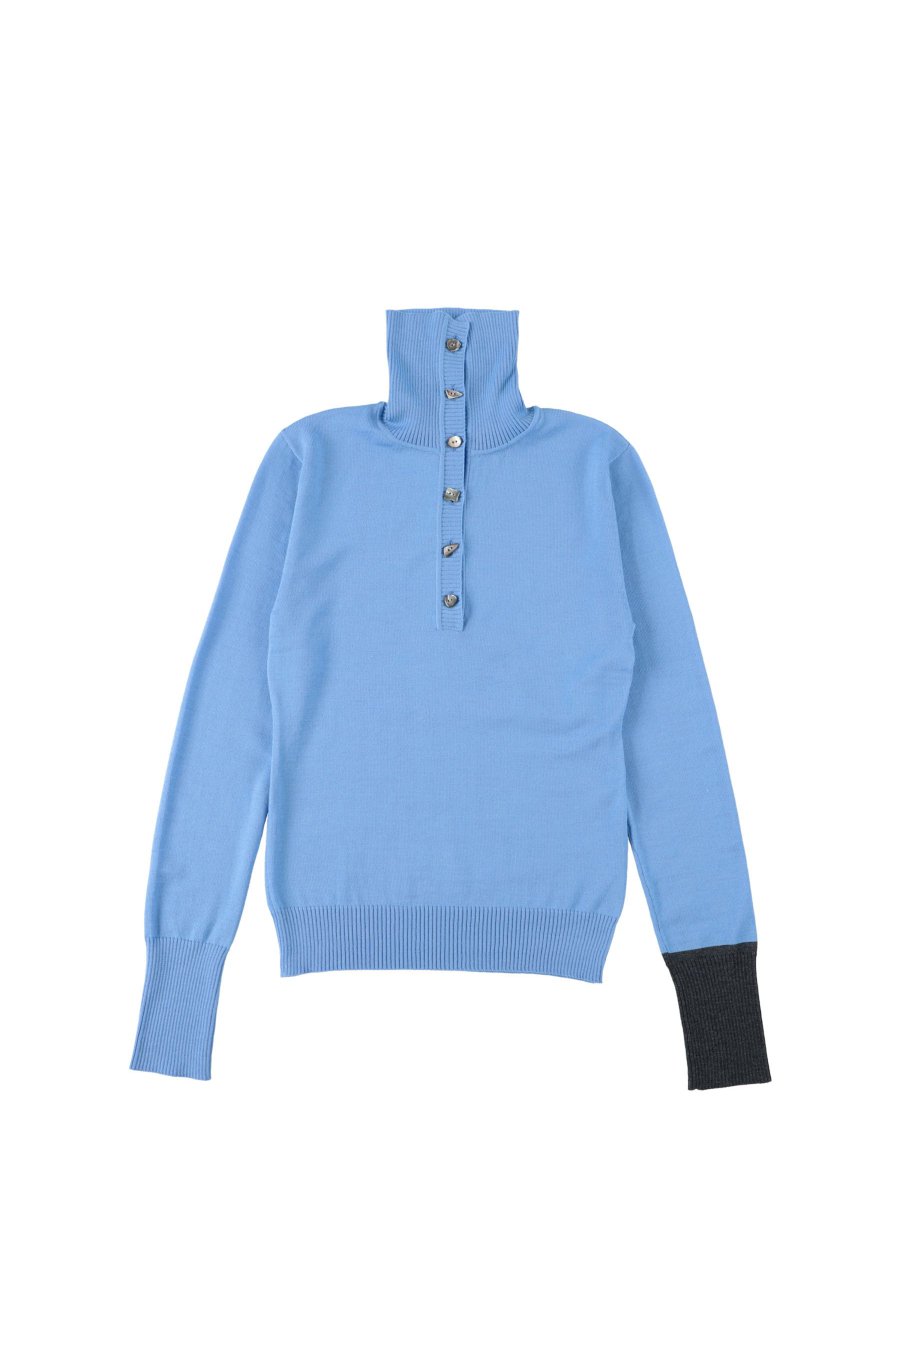 BELPER  22AW WOOL KNIT TOP(BLUE/GRAY)<img class='new_mark_img2' src='https://img.shop-pro.jp/img/new/icons15.gif' style='border:none;display:inline;margin:0px;padding:0px;width:auto;' />